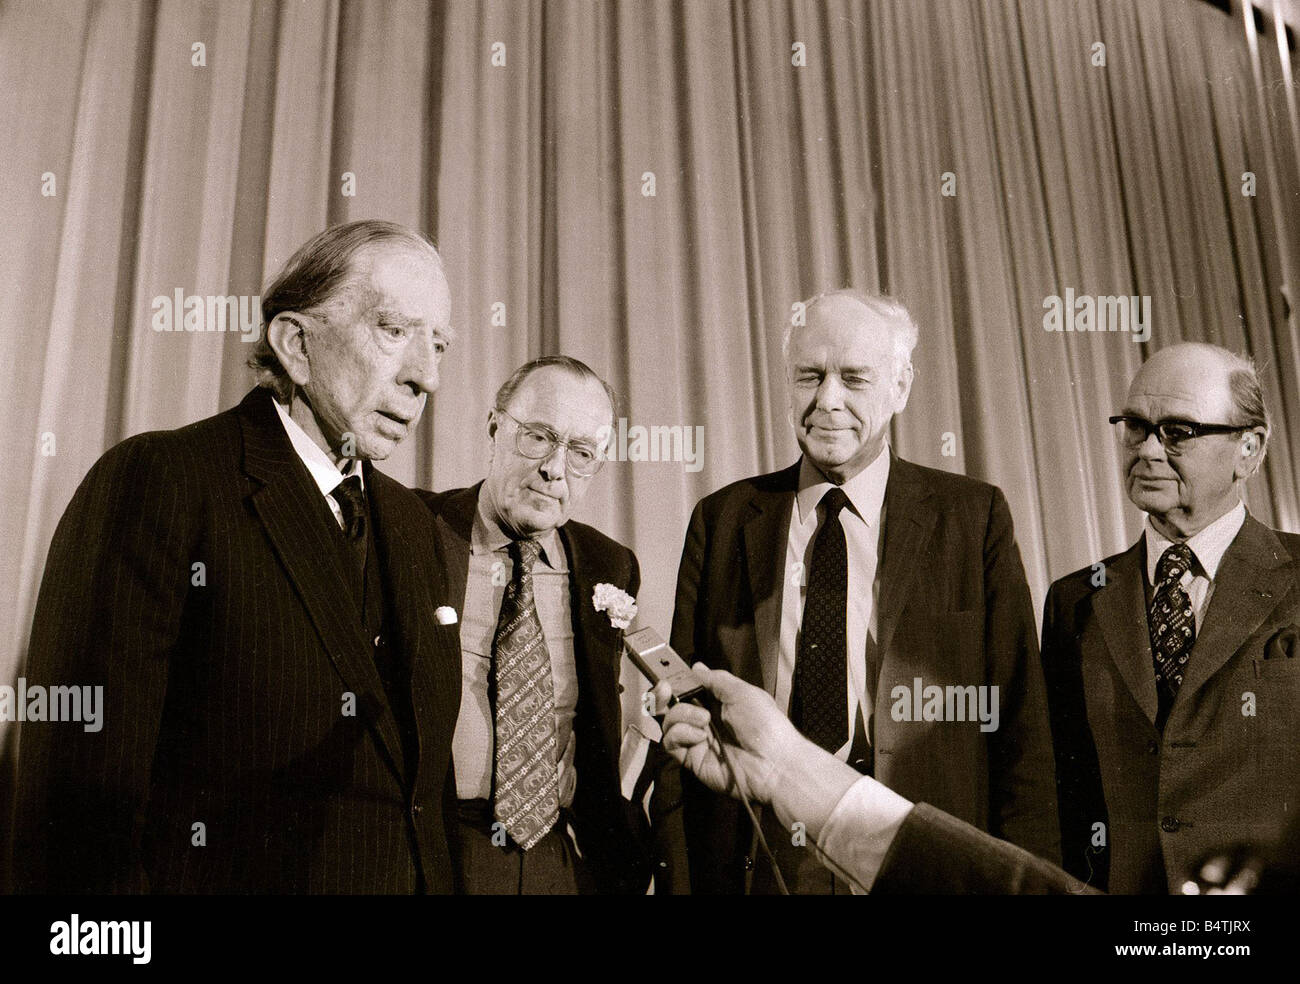 John Paul Getty Oil Billionaire gives 20 000 to the world wildlife fund seen here with Prince Bernhard and General Charles Lindbergh and mr Peter Scott at the Launch at the US embassy in London Businessman Tycoon John Paul Getty looking old and frail February 1974 Mirrorpix com Stock Photo